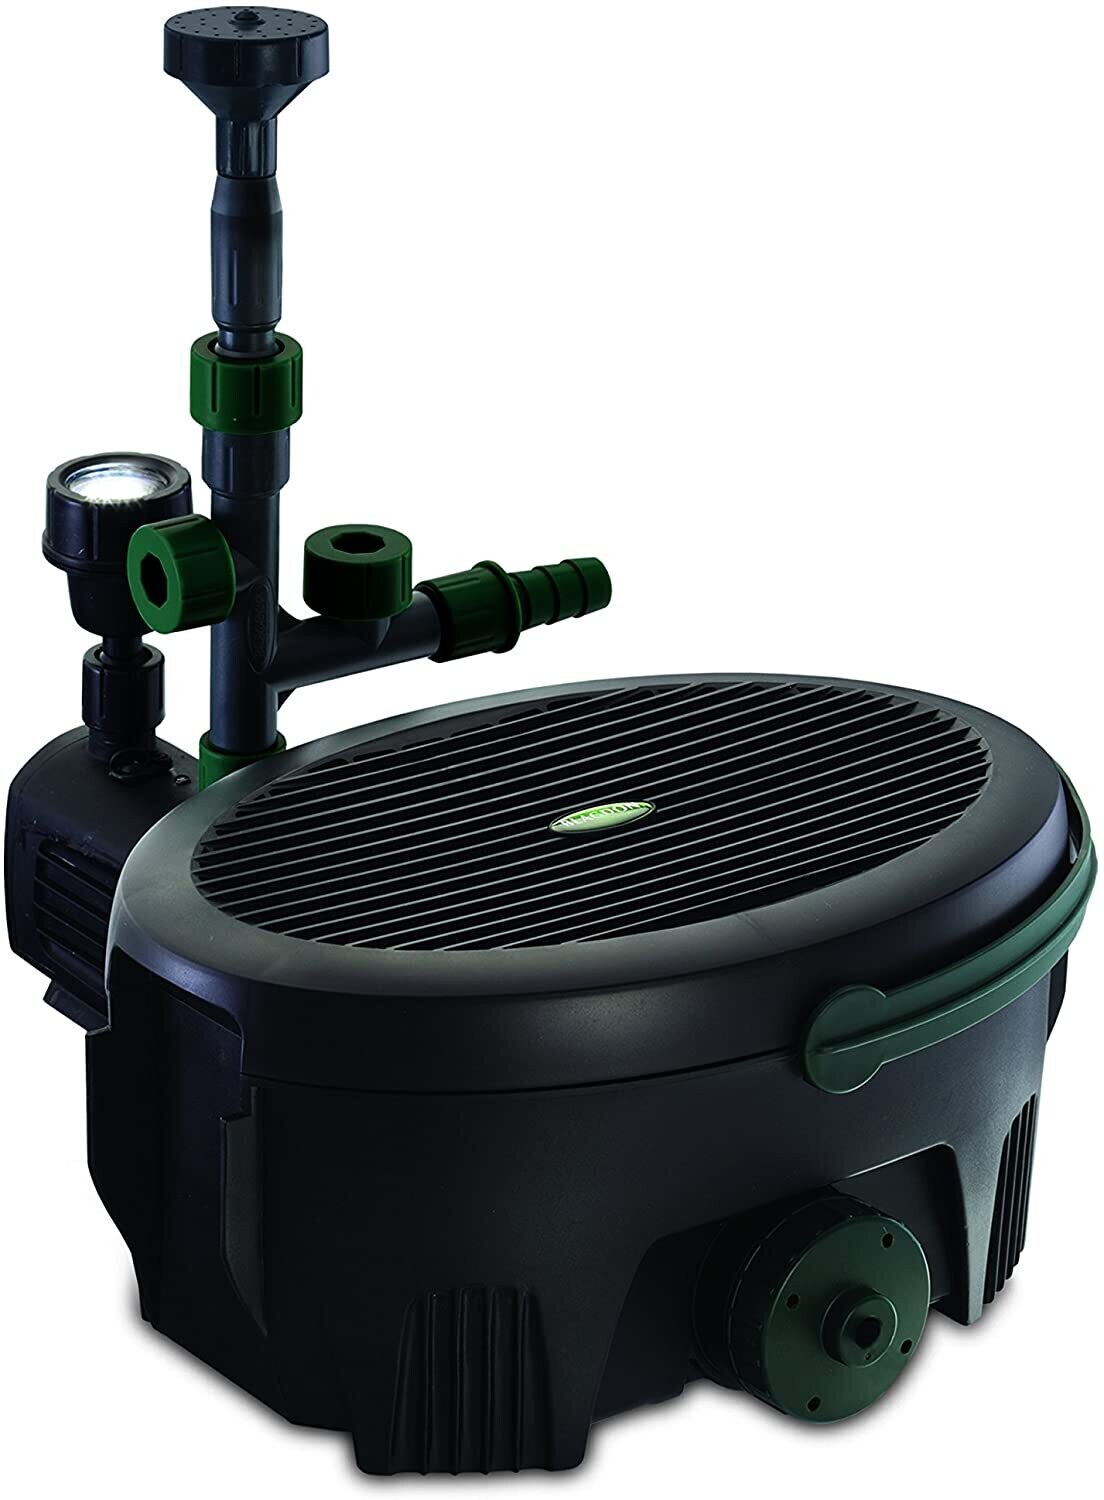 Inpond 6 in 1 Pond Pump and Filter with UV Clarifier